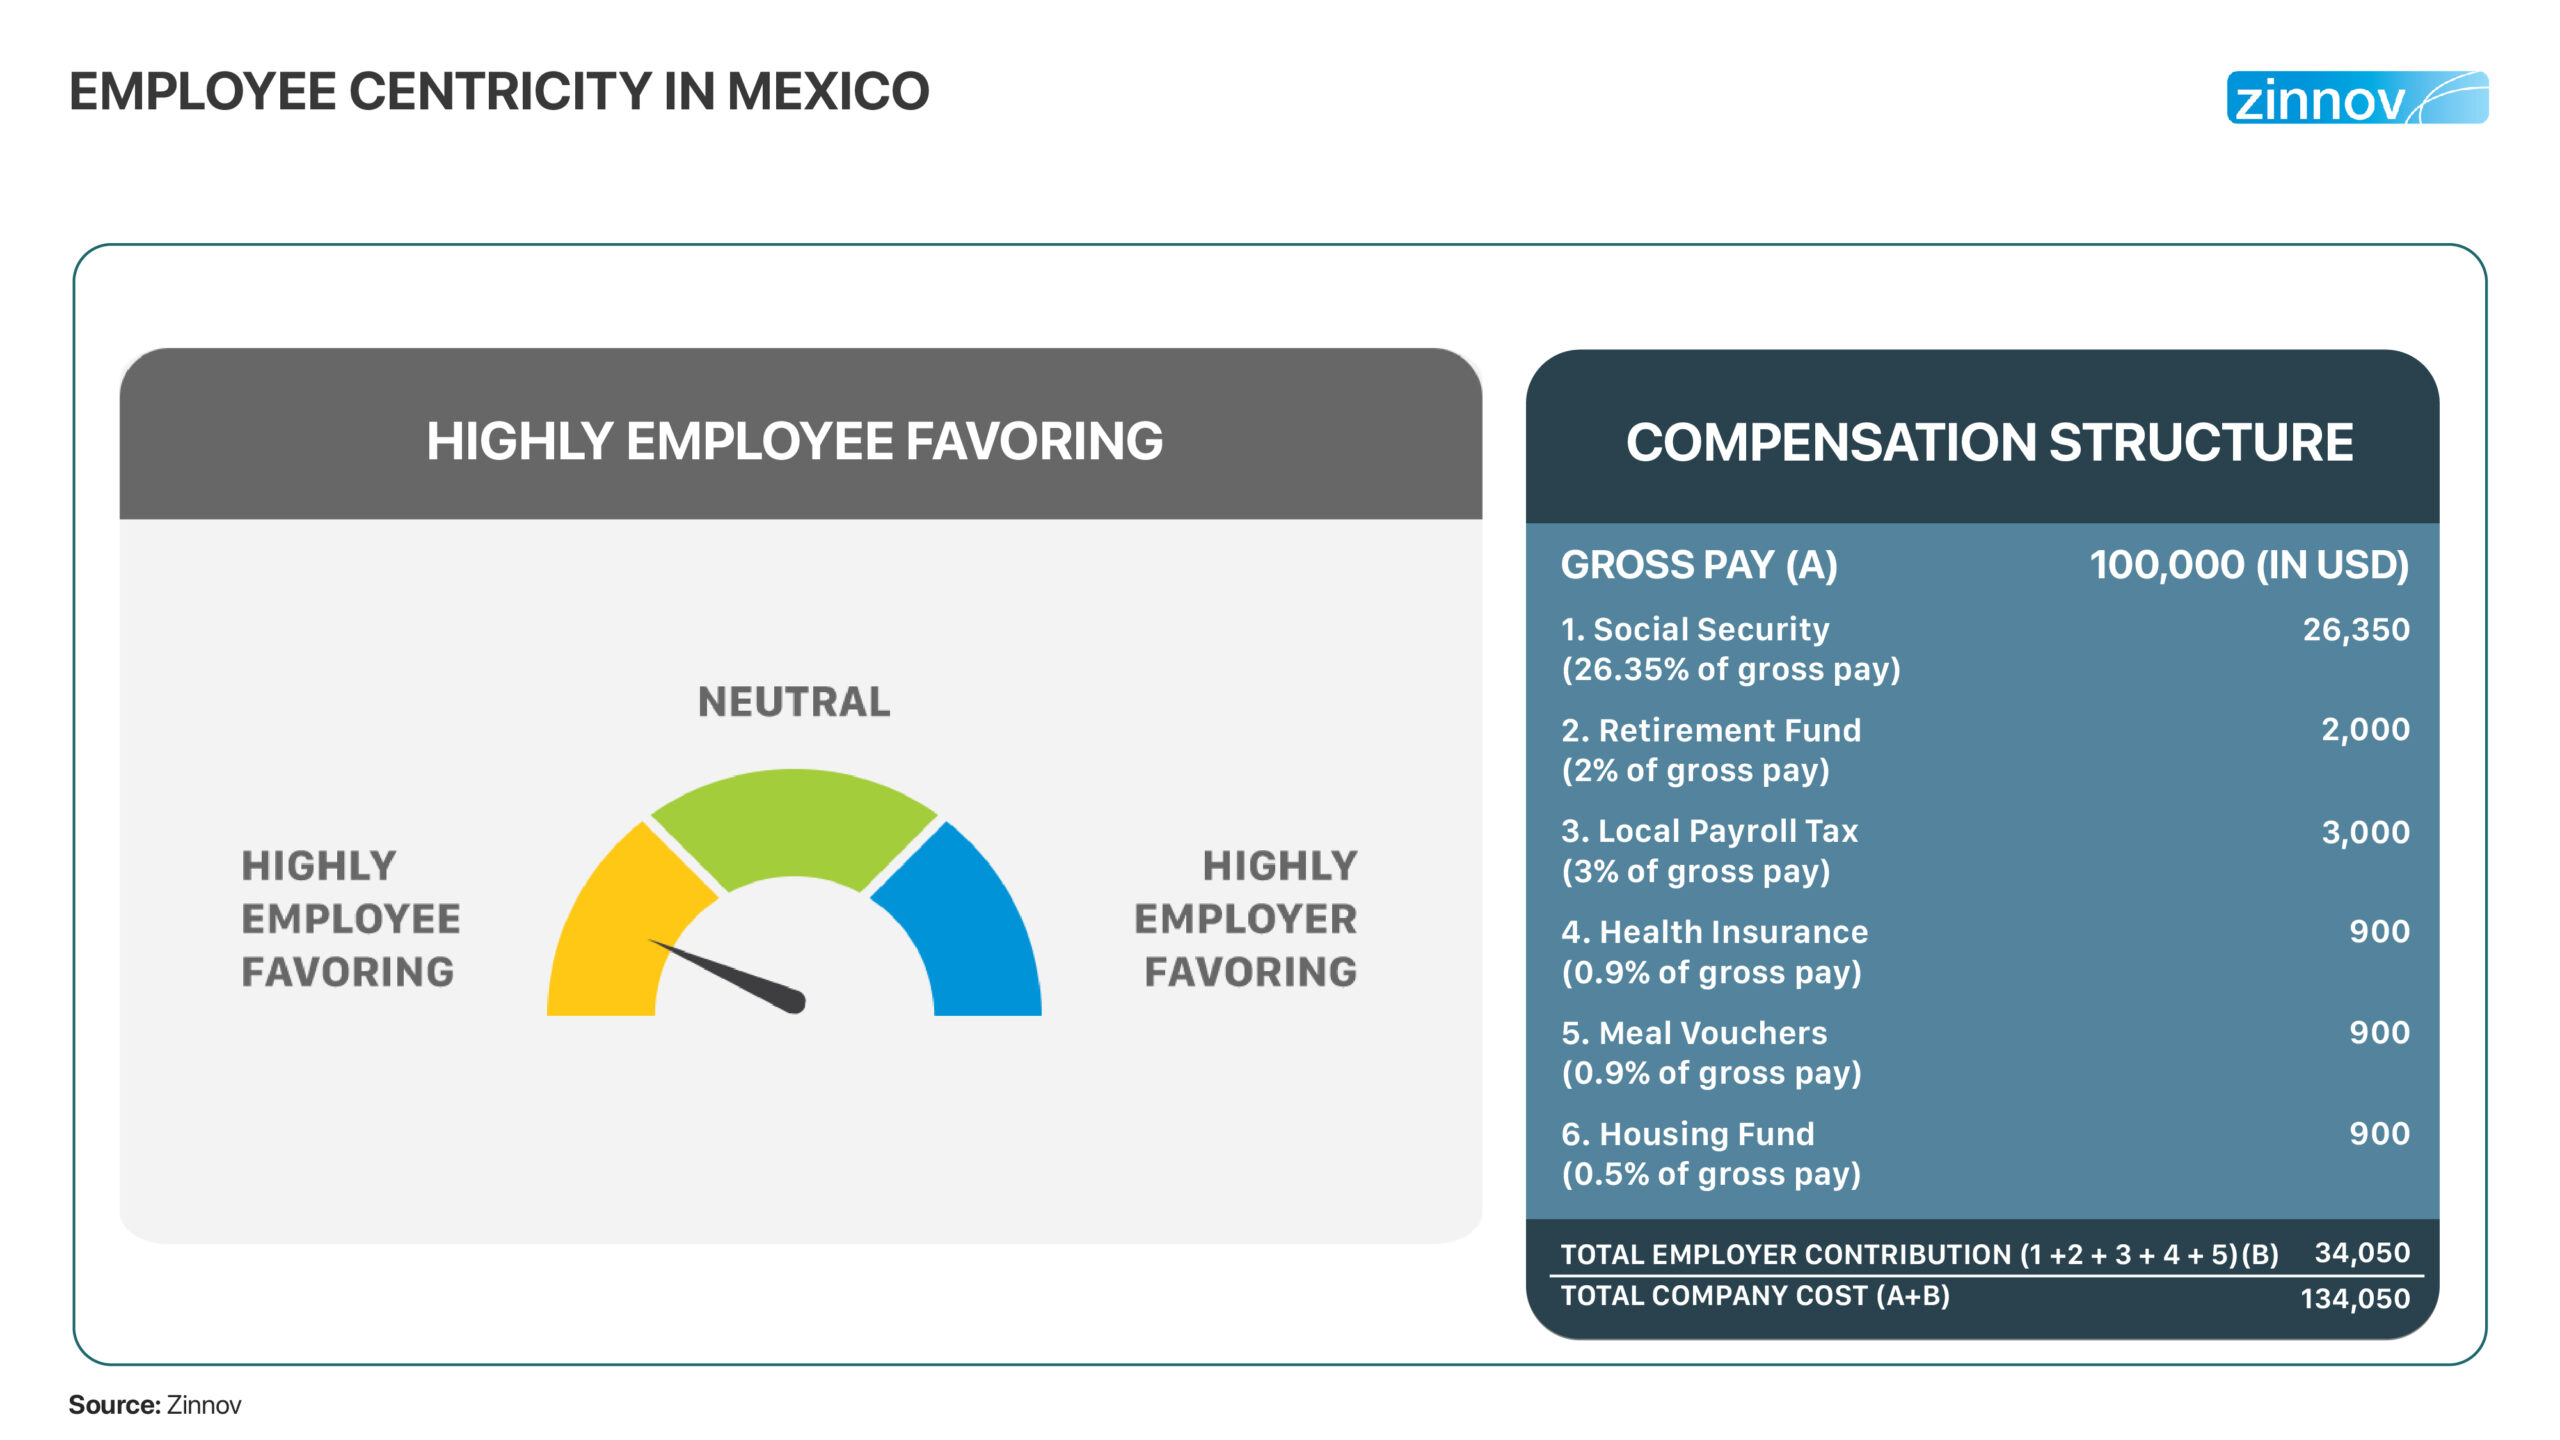 Employee centricity in Mexico